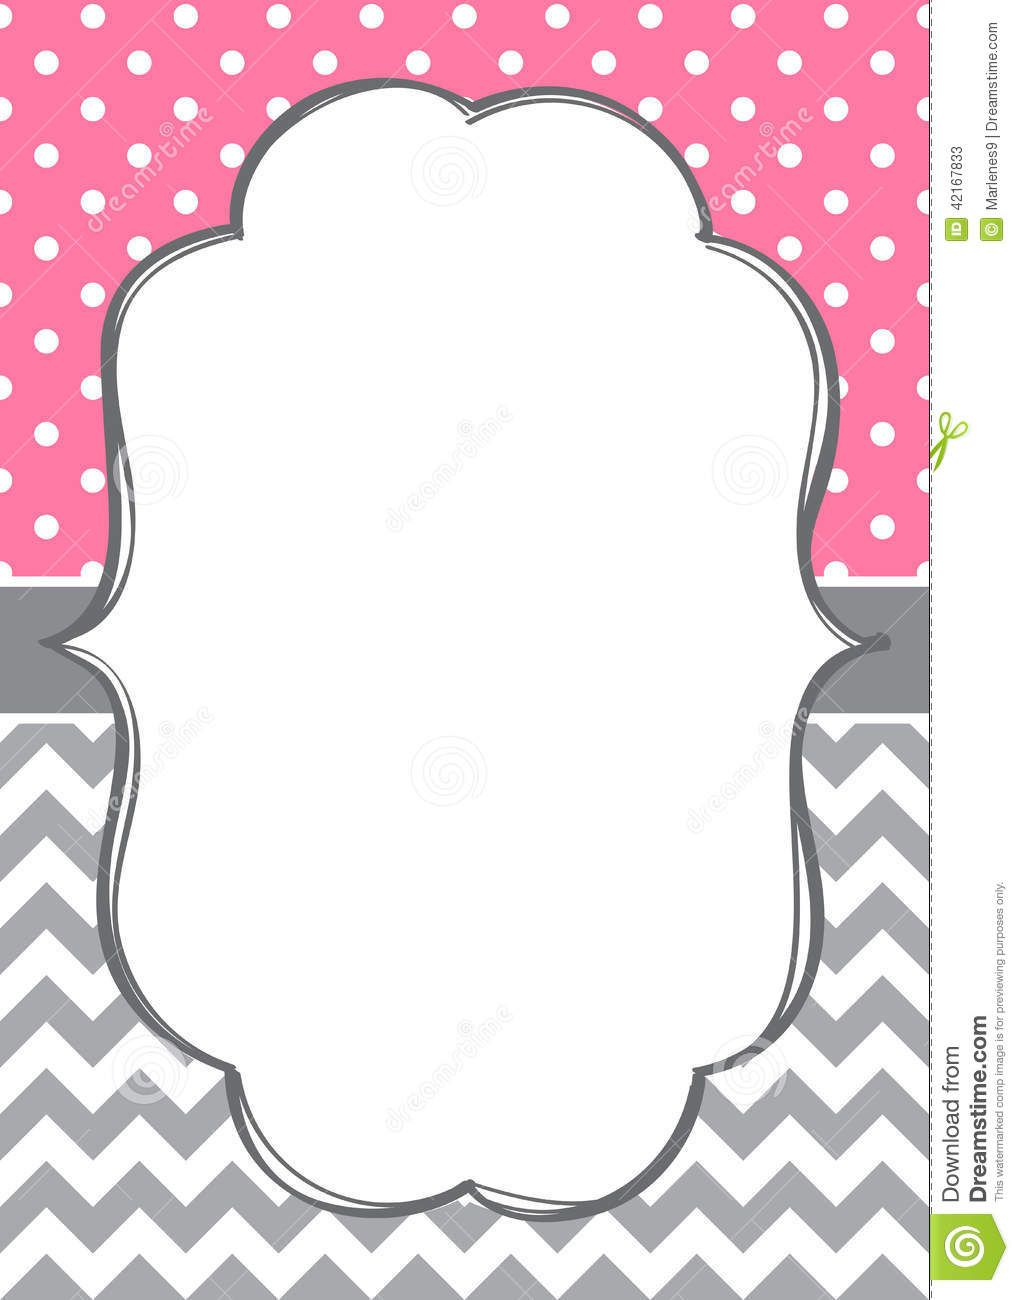 File Name Invitation Card Template Polka Dot Chevron Background pertaining to sizing 1019 X 1300